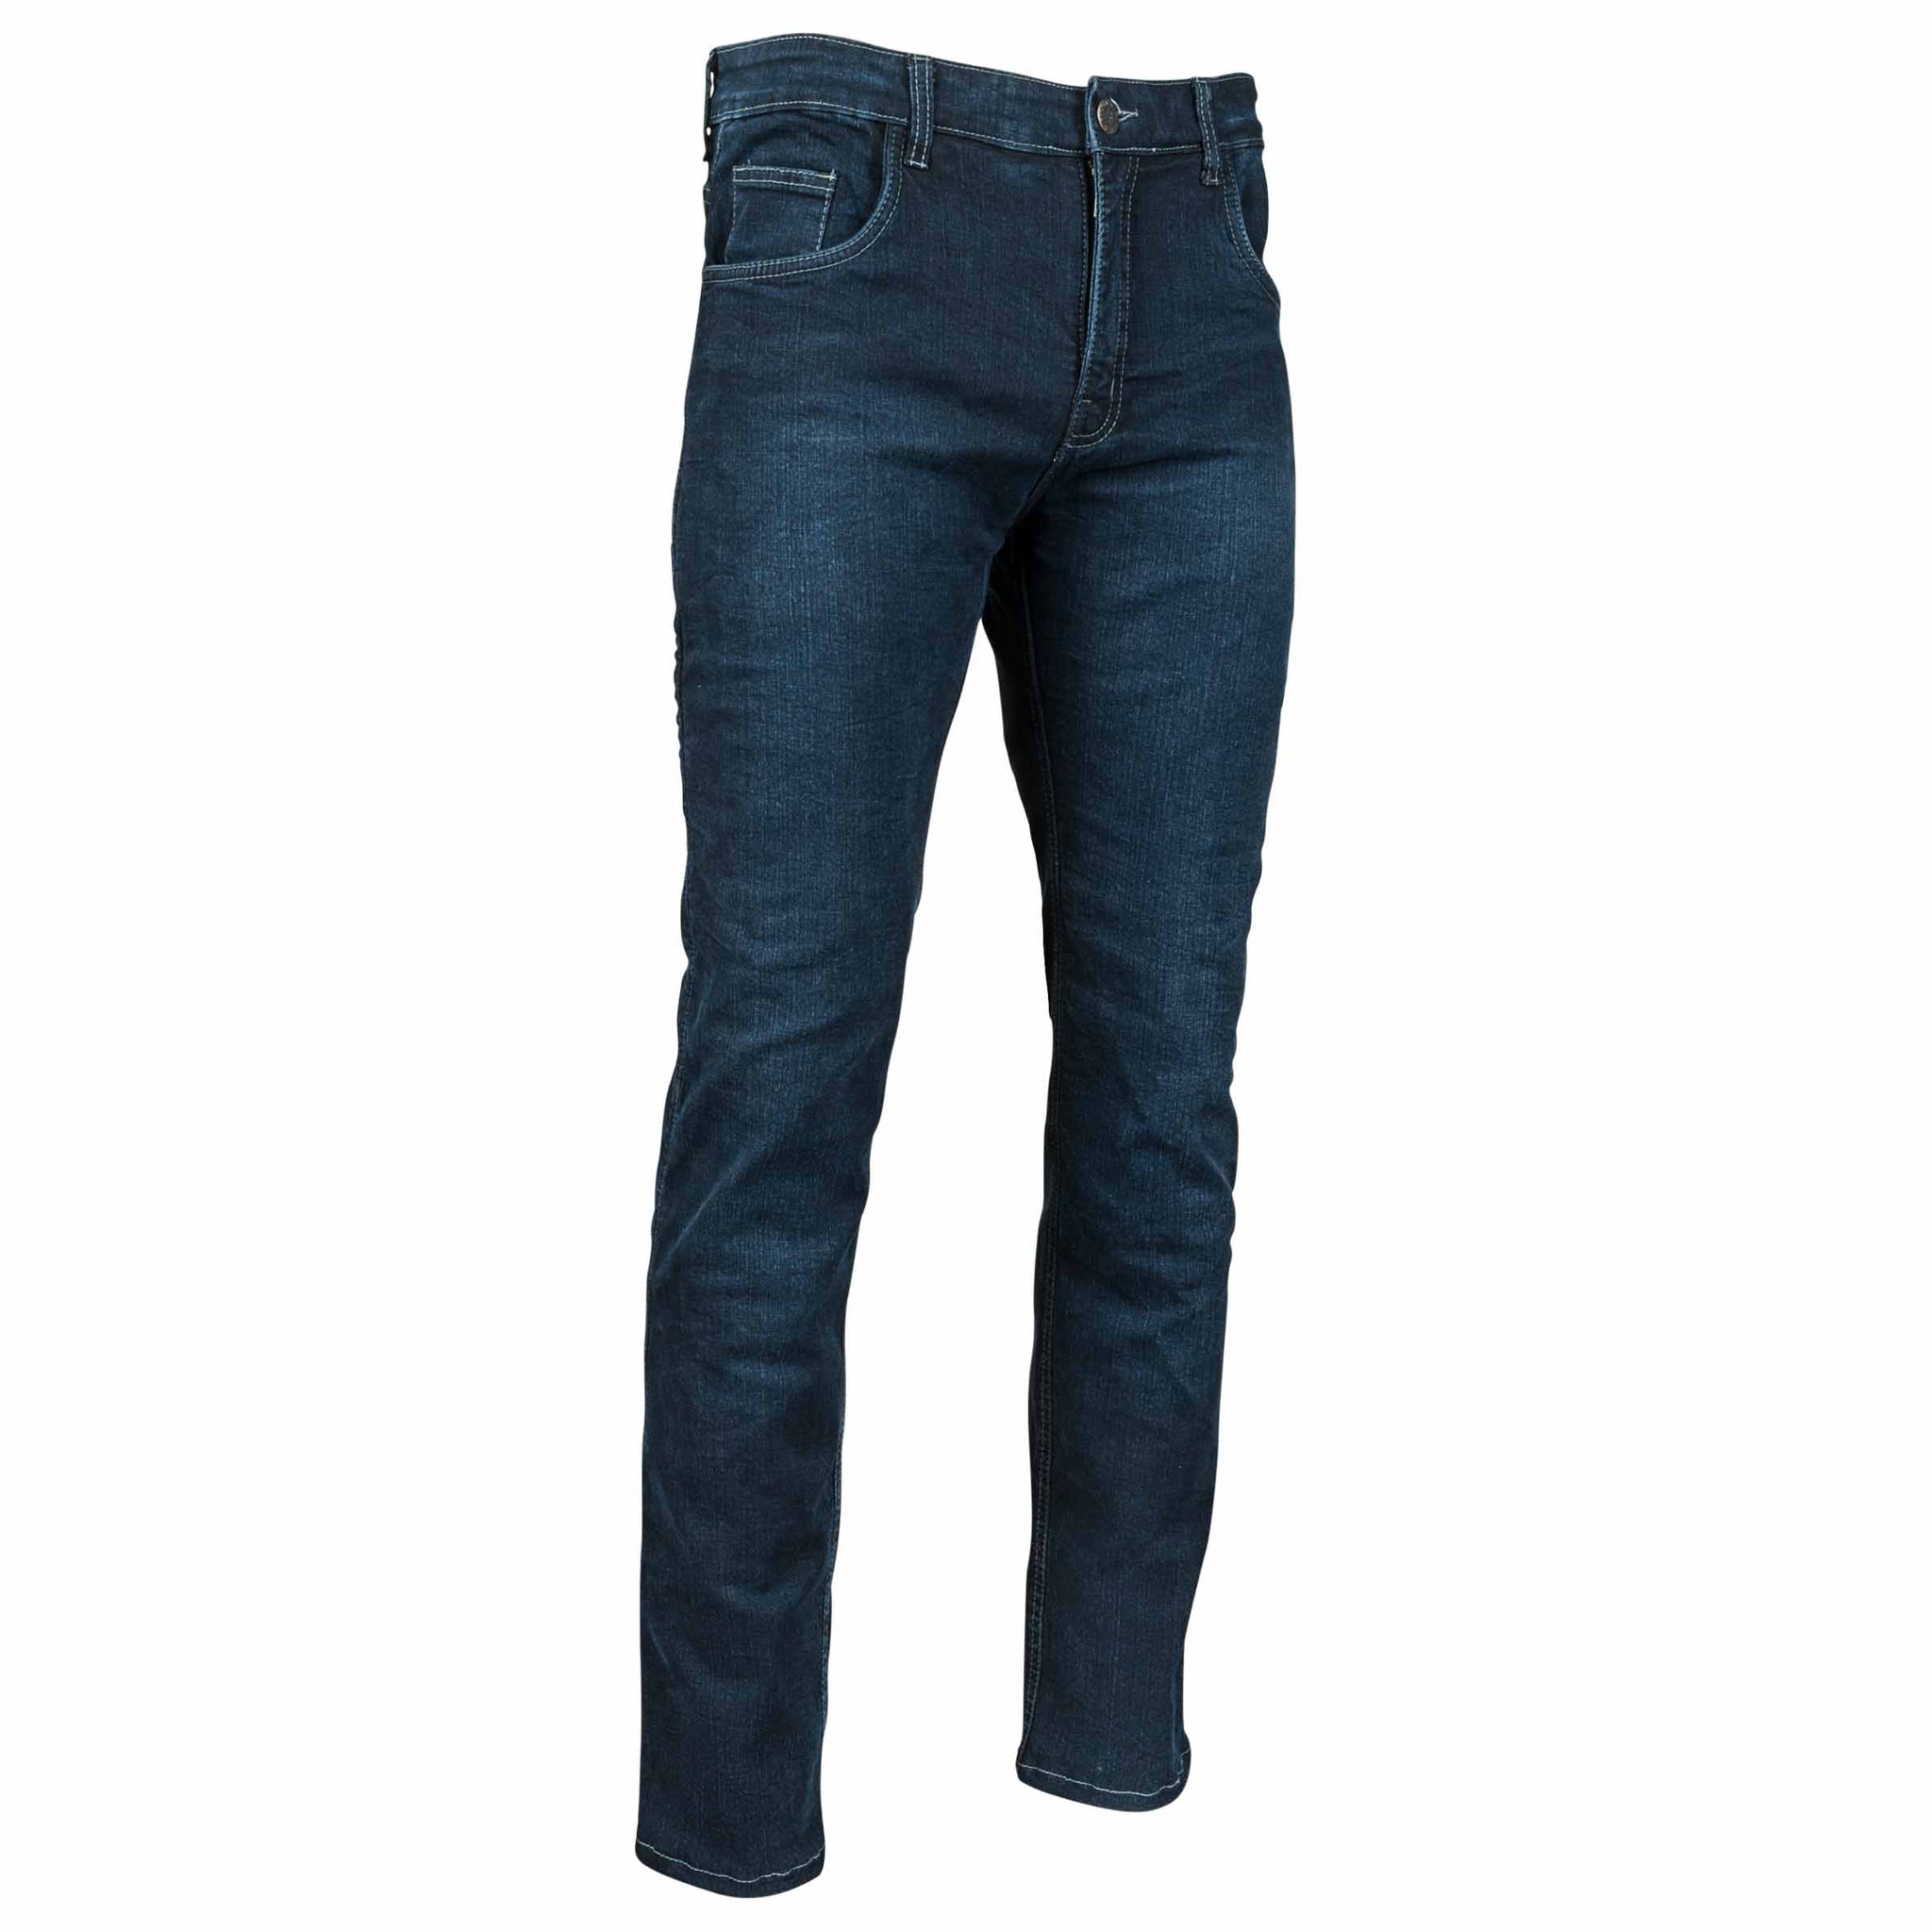 Certified Safest Motorcycle Jeans & Pants